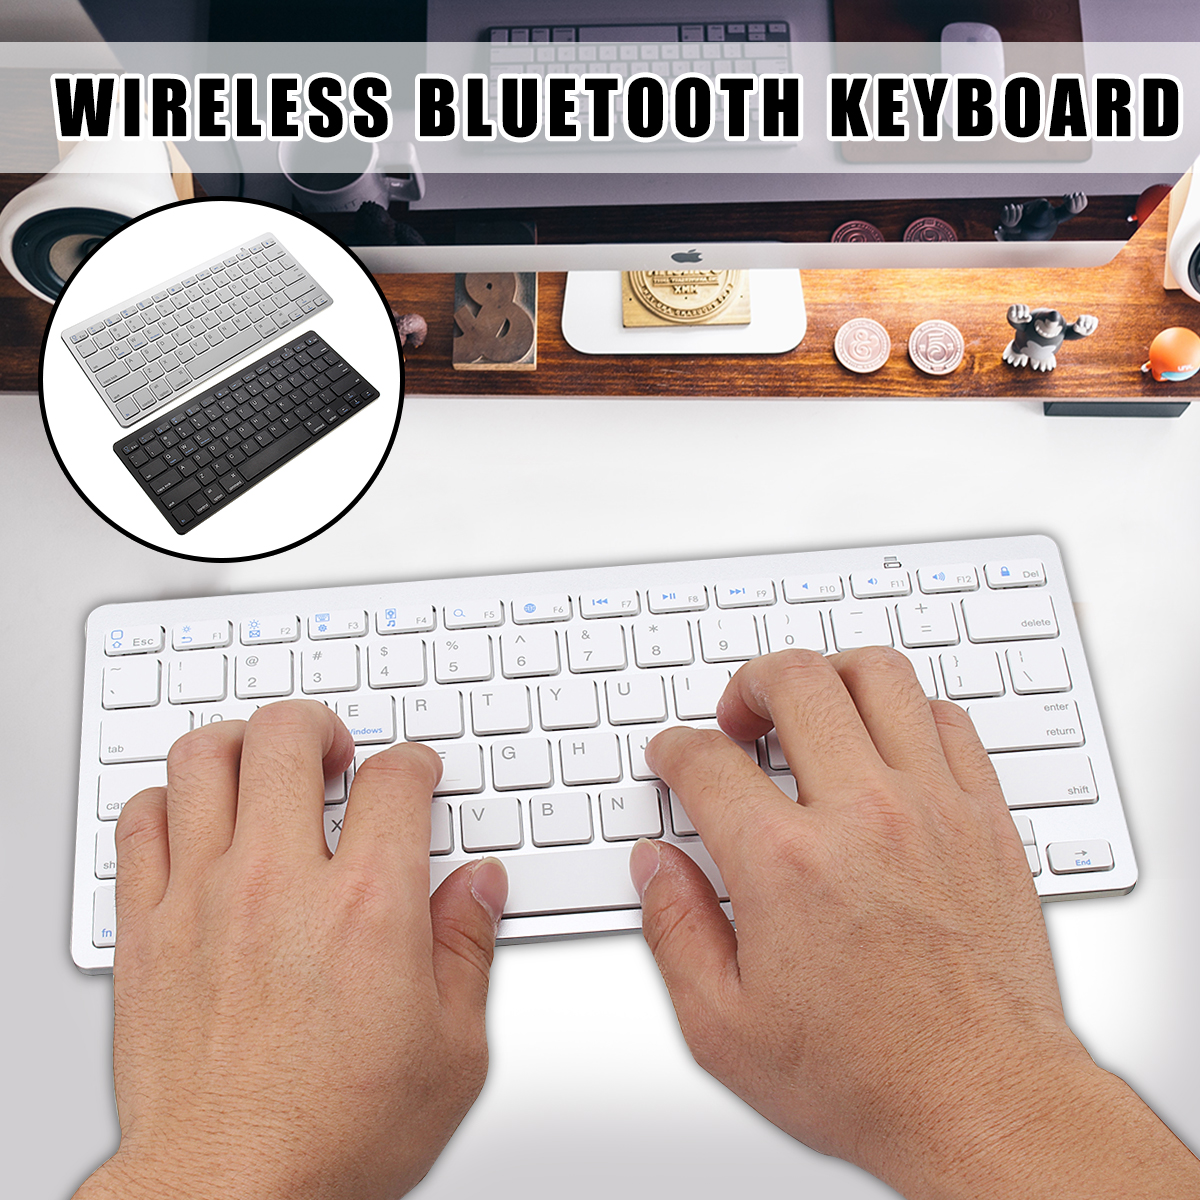 Wirelss bluetooth 3.0 Keyboard For iPhone iPad Macbook Samsung Tablet PC iOS Android Devices 12